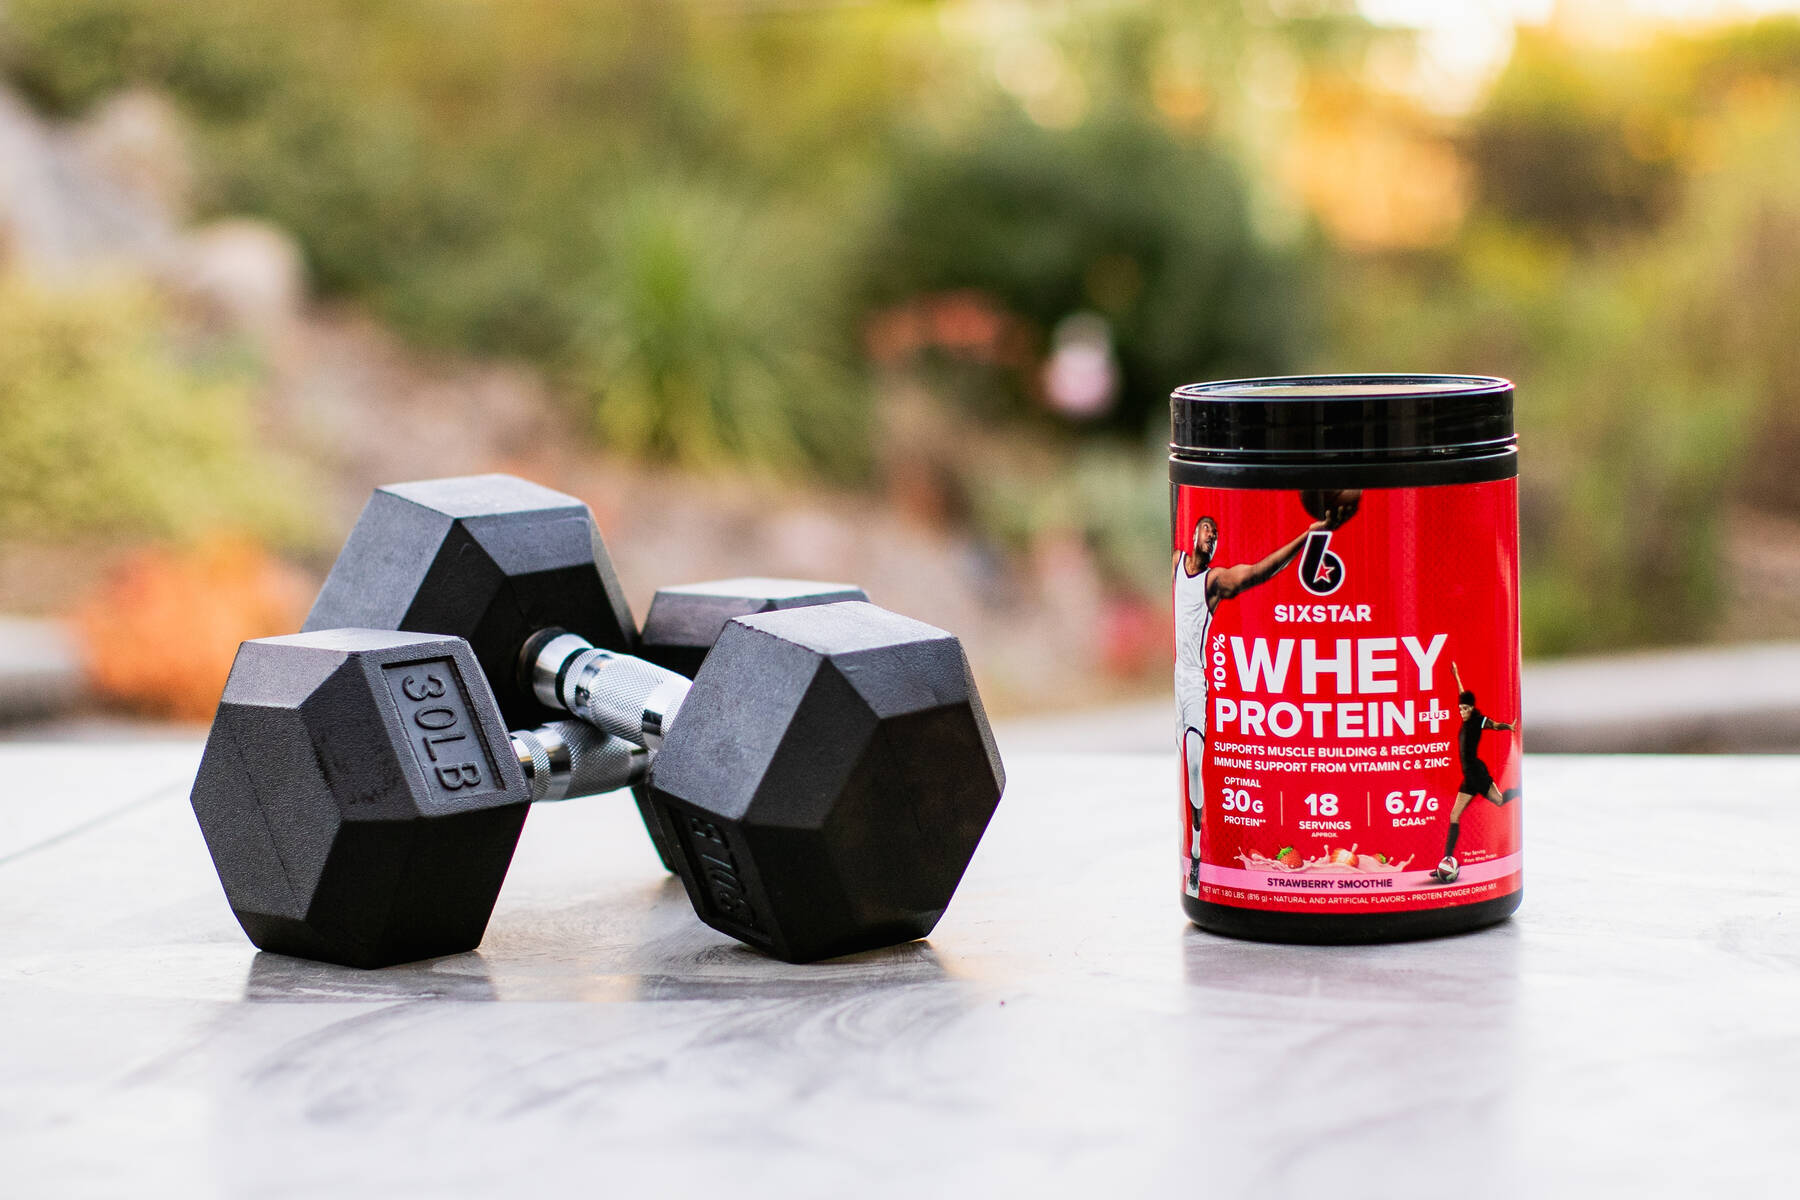 A red container of Six Star Whey Protein powder sits on an outdoor surface with a pair of black dumbbells surrounded by greenery